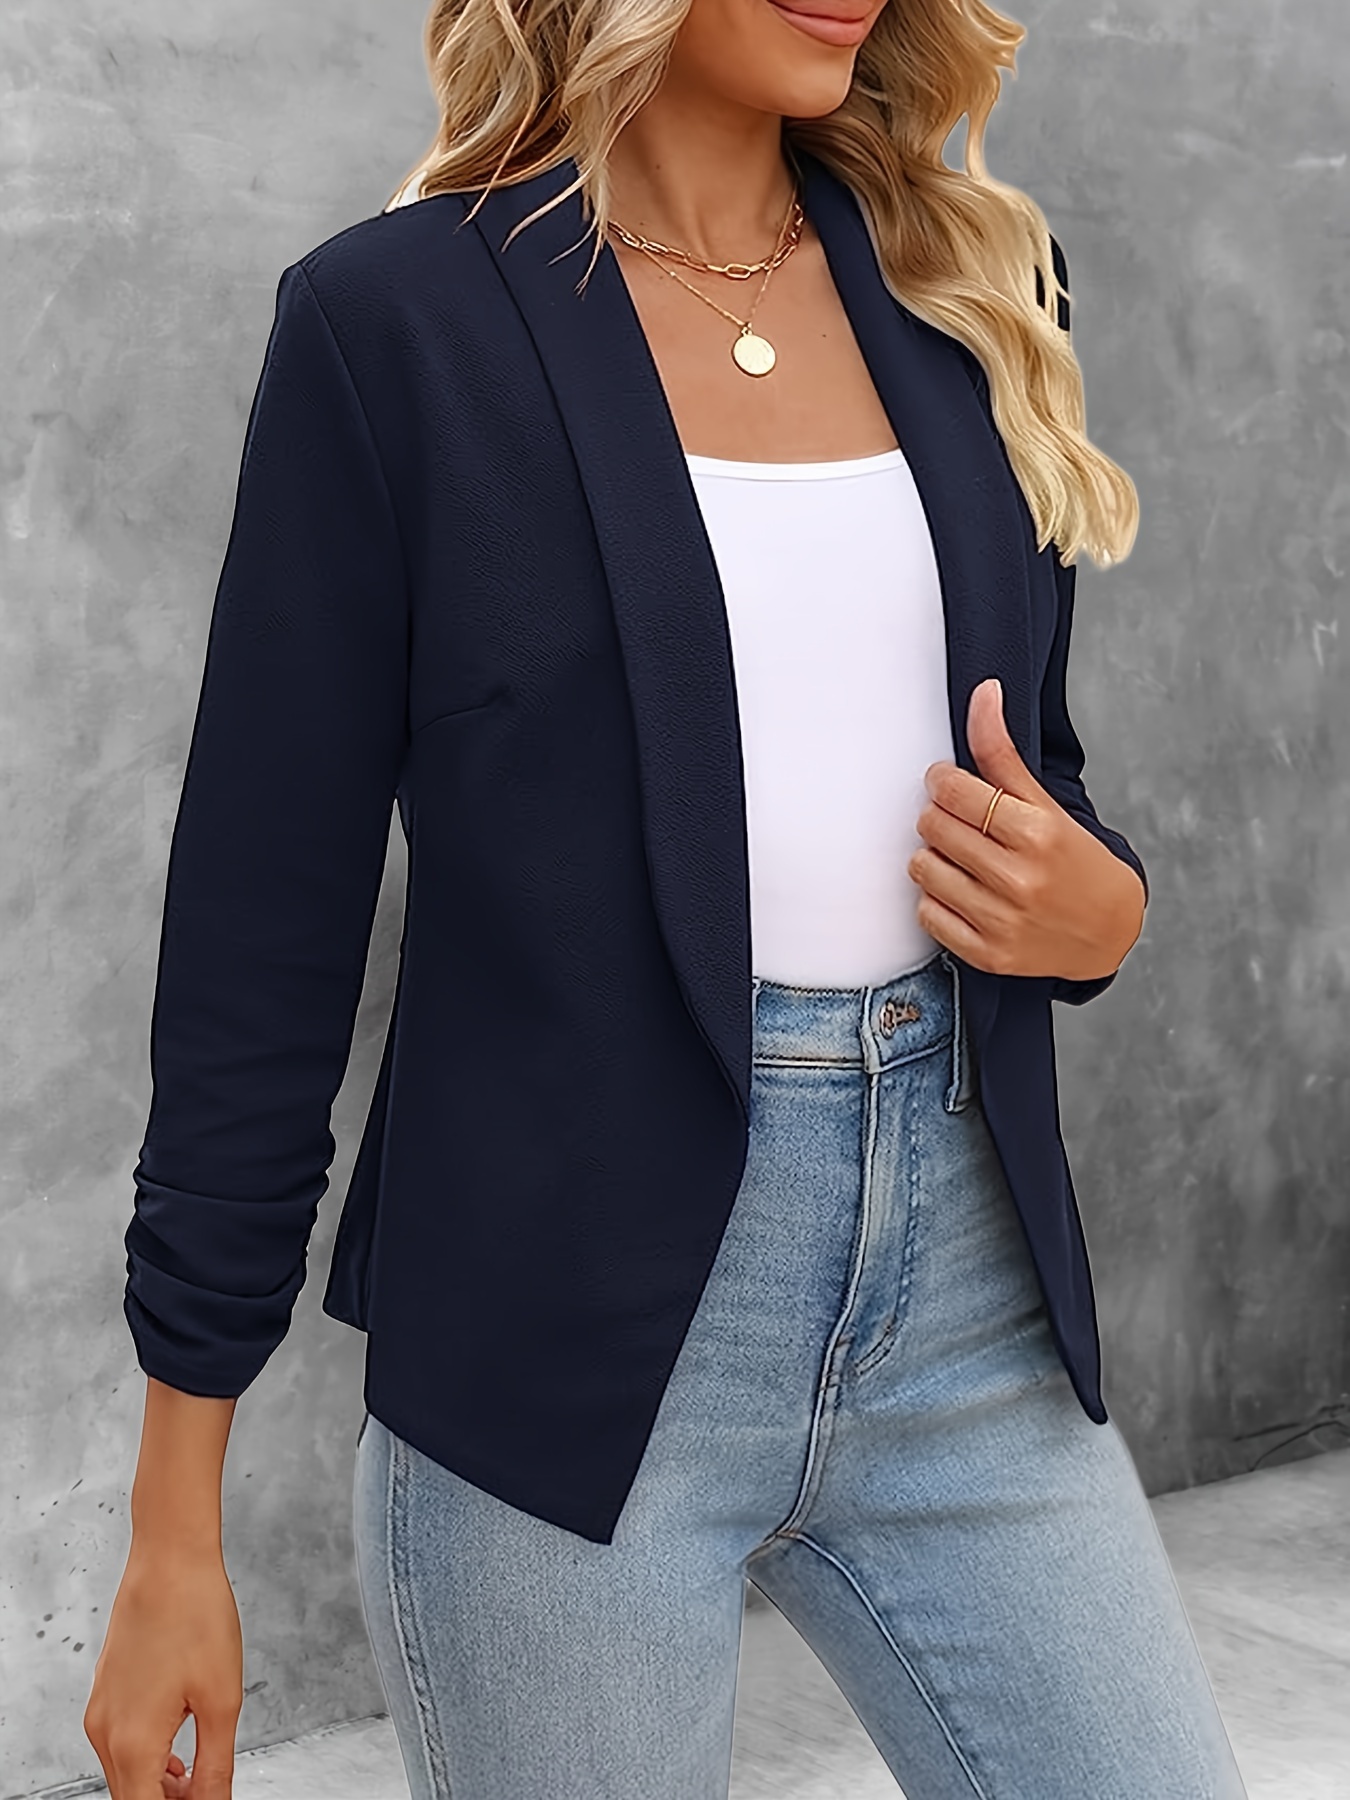 solid color open front blazer elegant lapel ruched sleeve blazer for office work womens clothing details 13